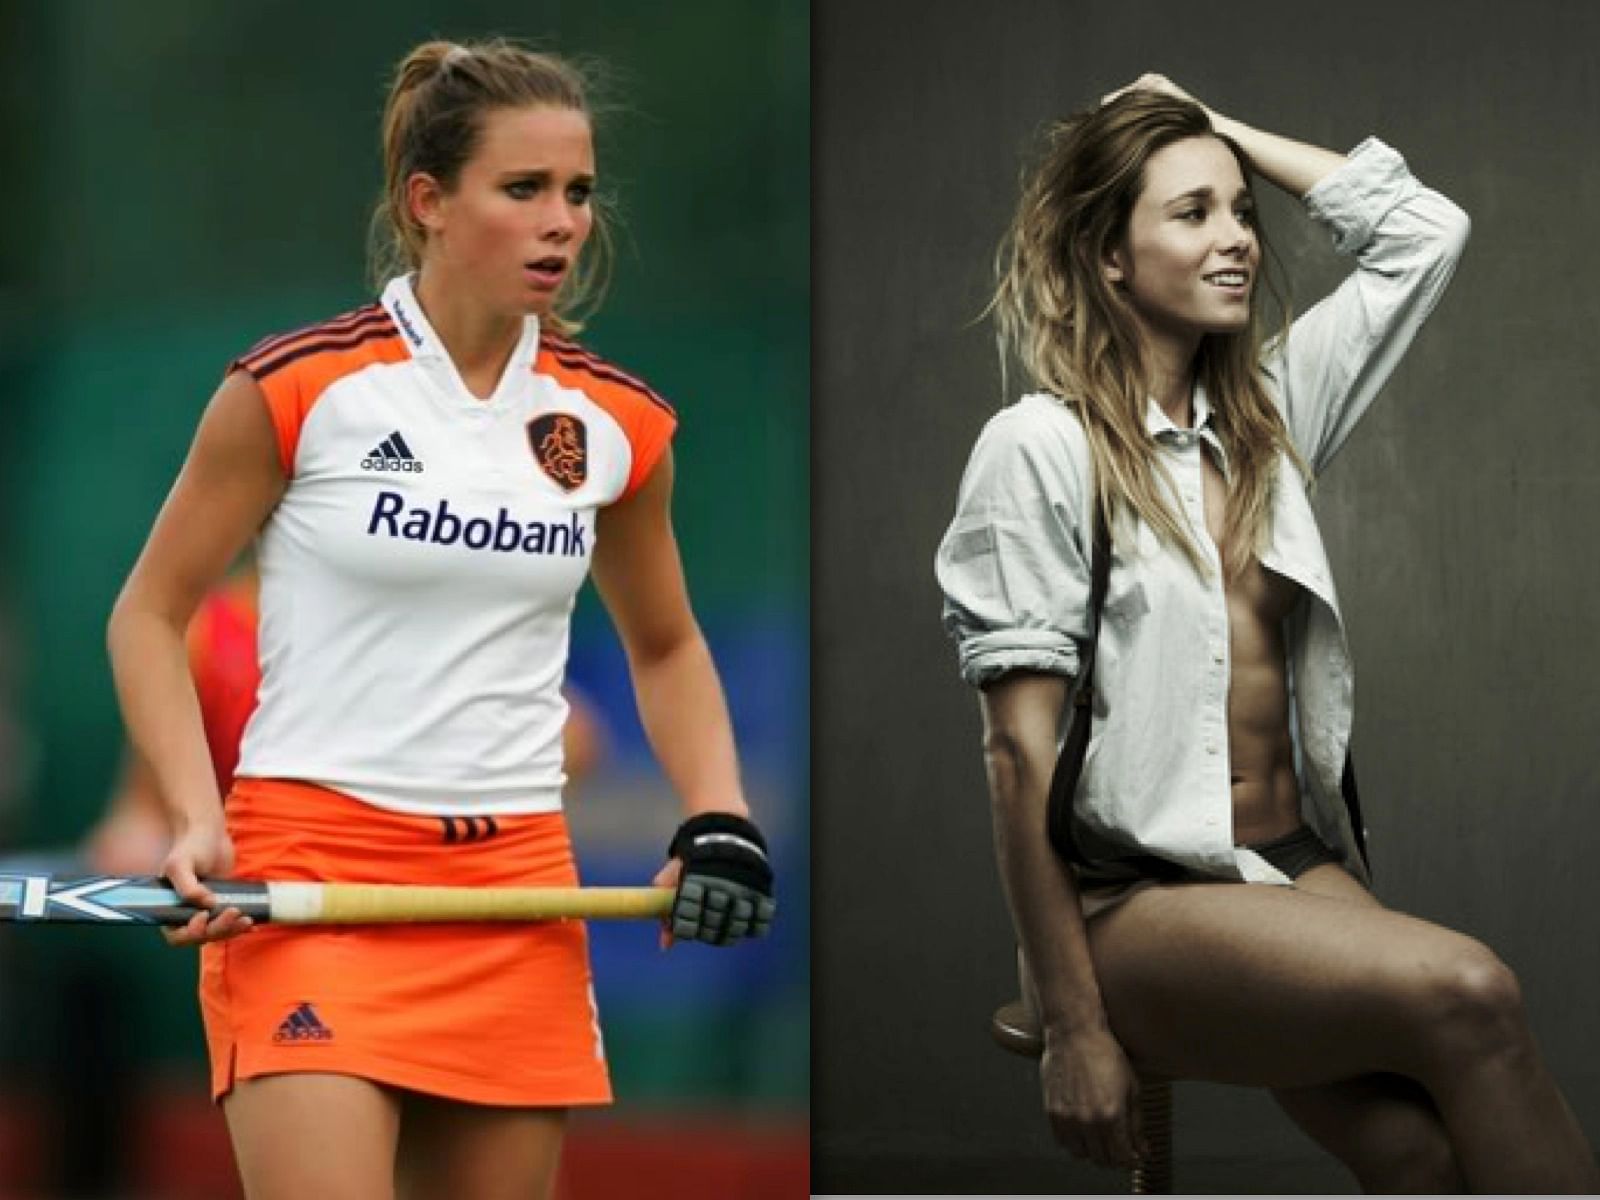 Top 10 Hottest Female Athletes In The World Slide 6 Of 10